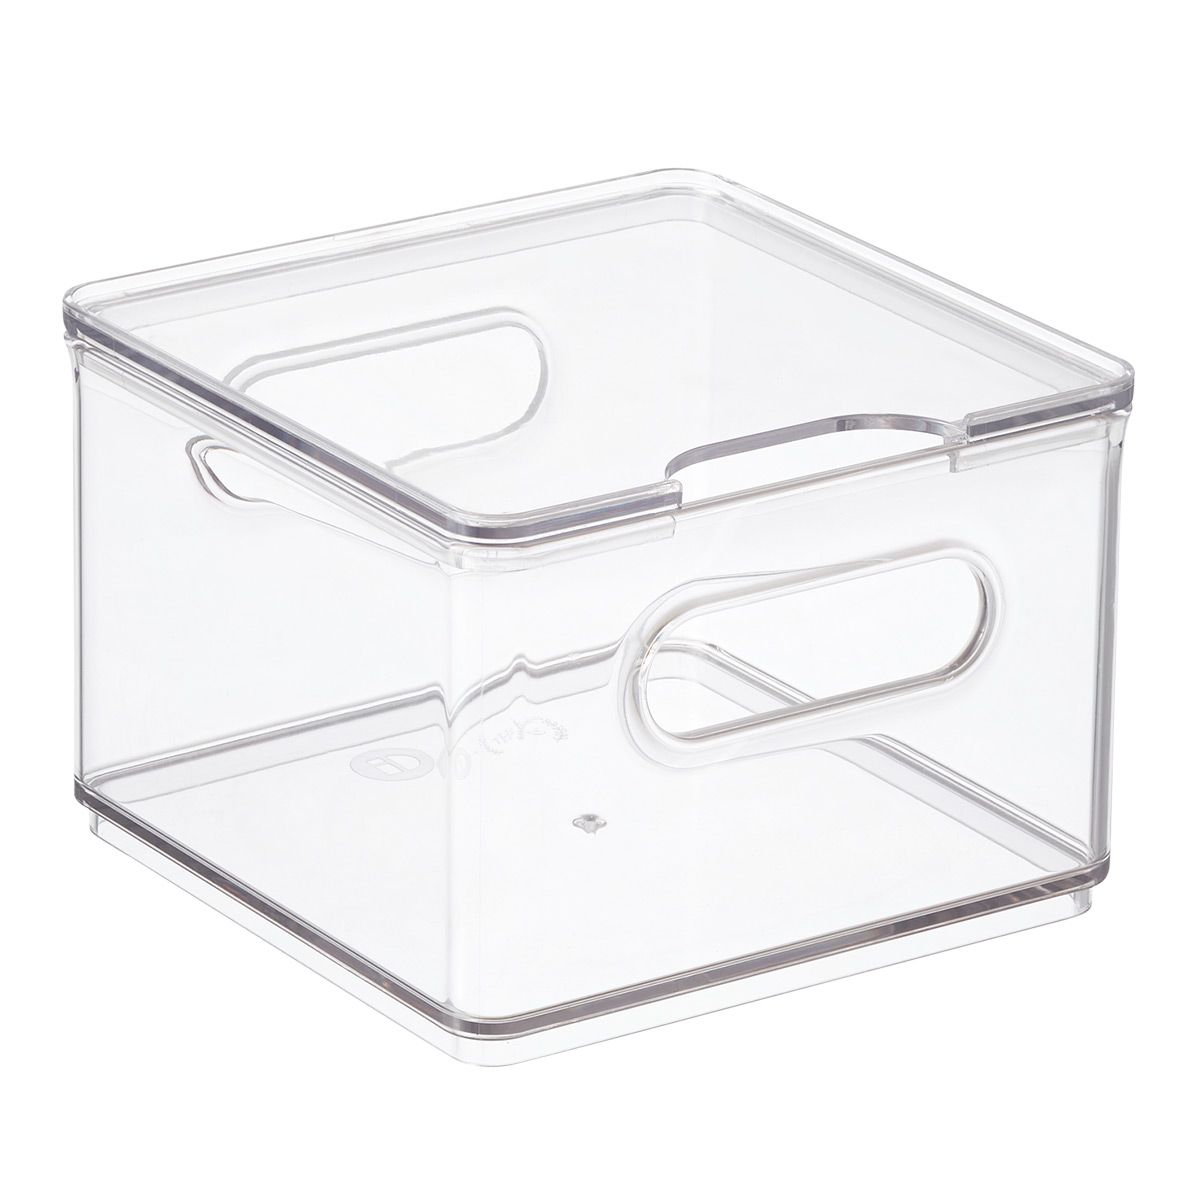 https://www.containerstore.com/catalogimages/387524/10080426-THE-small-fridge-bin.jpg